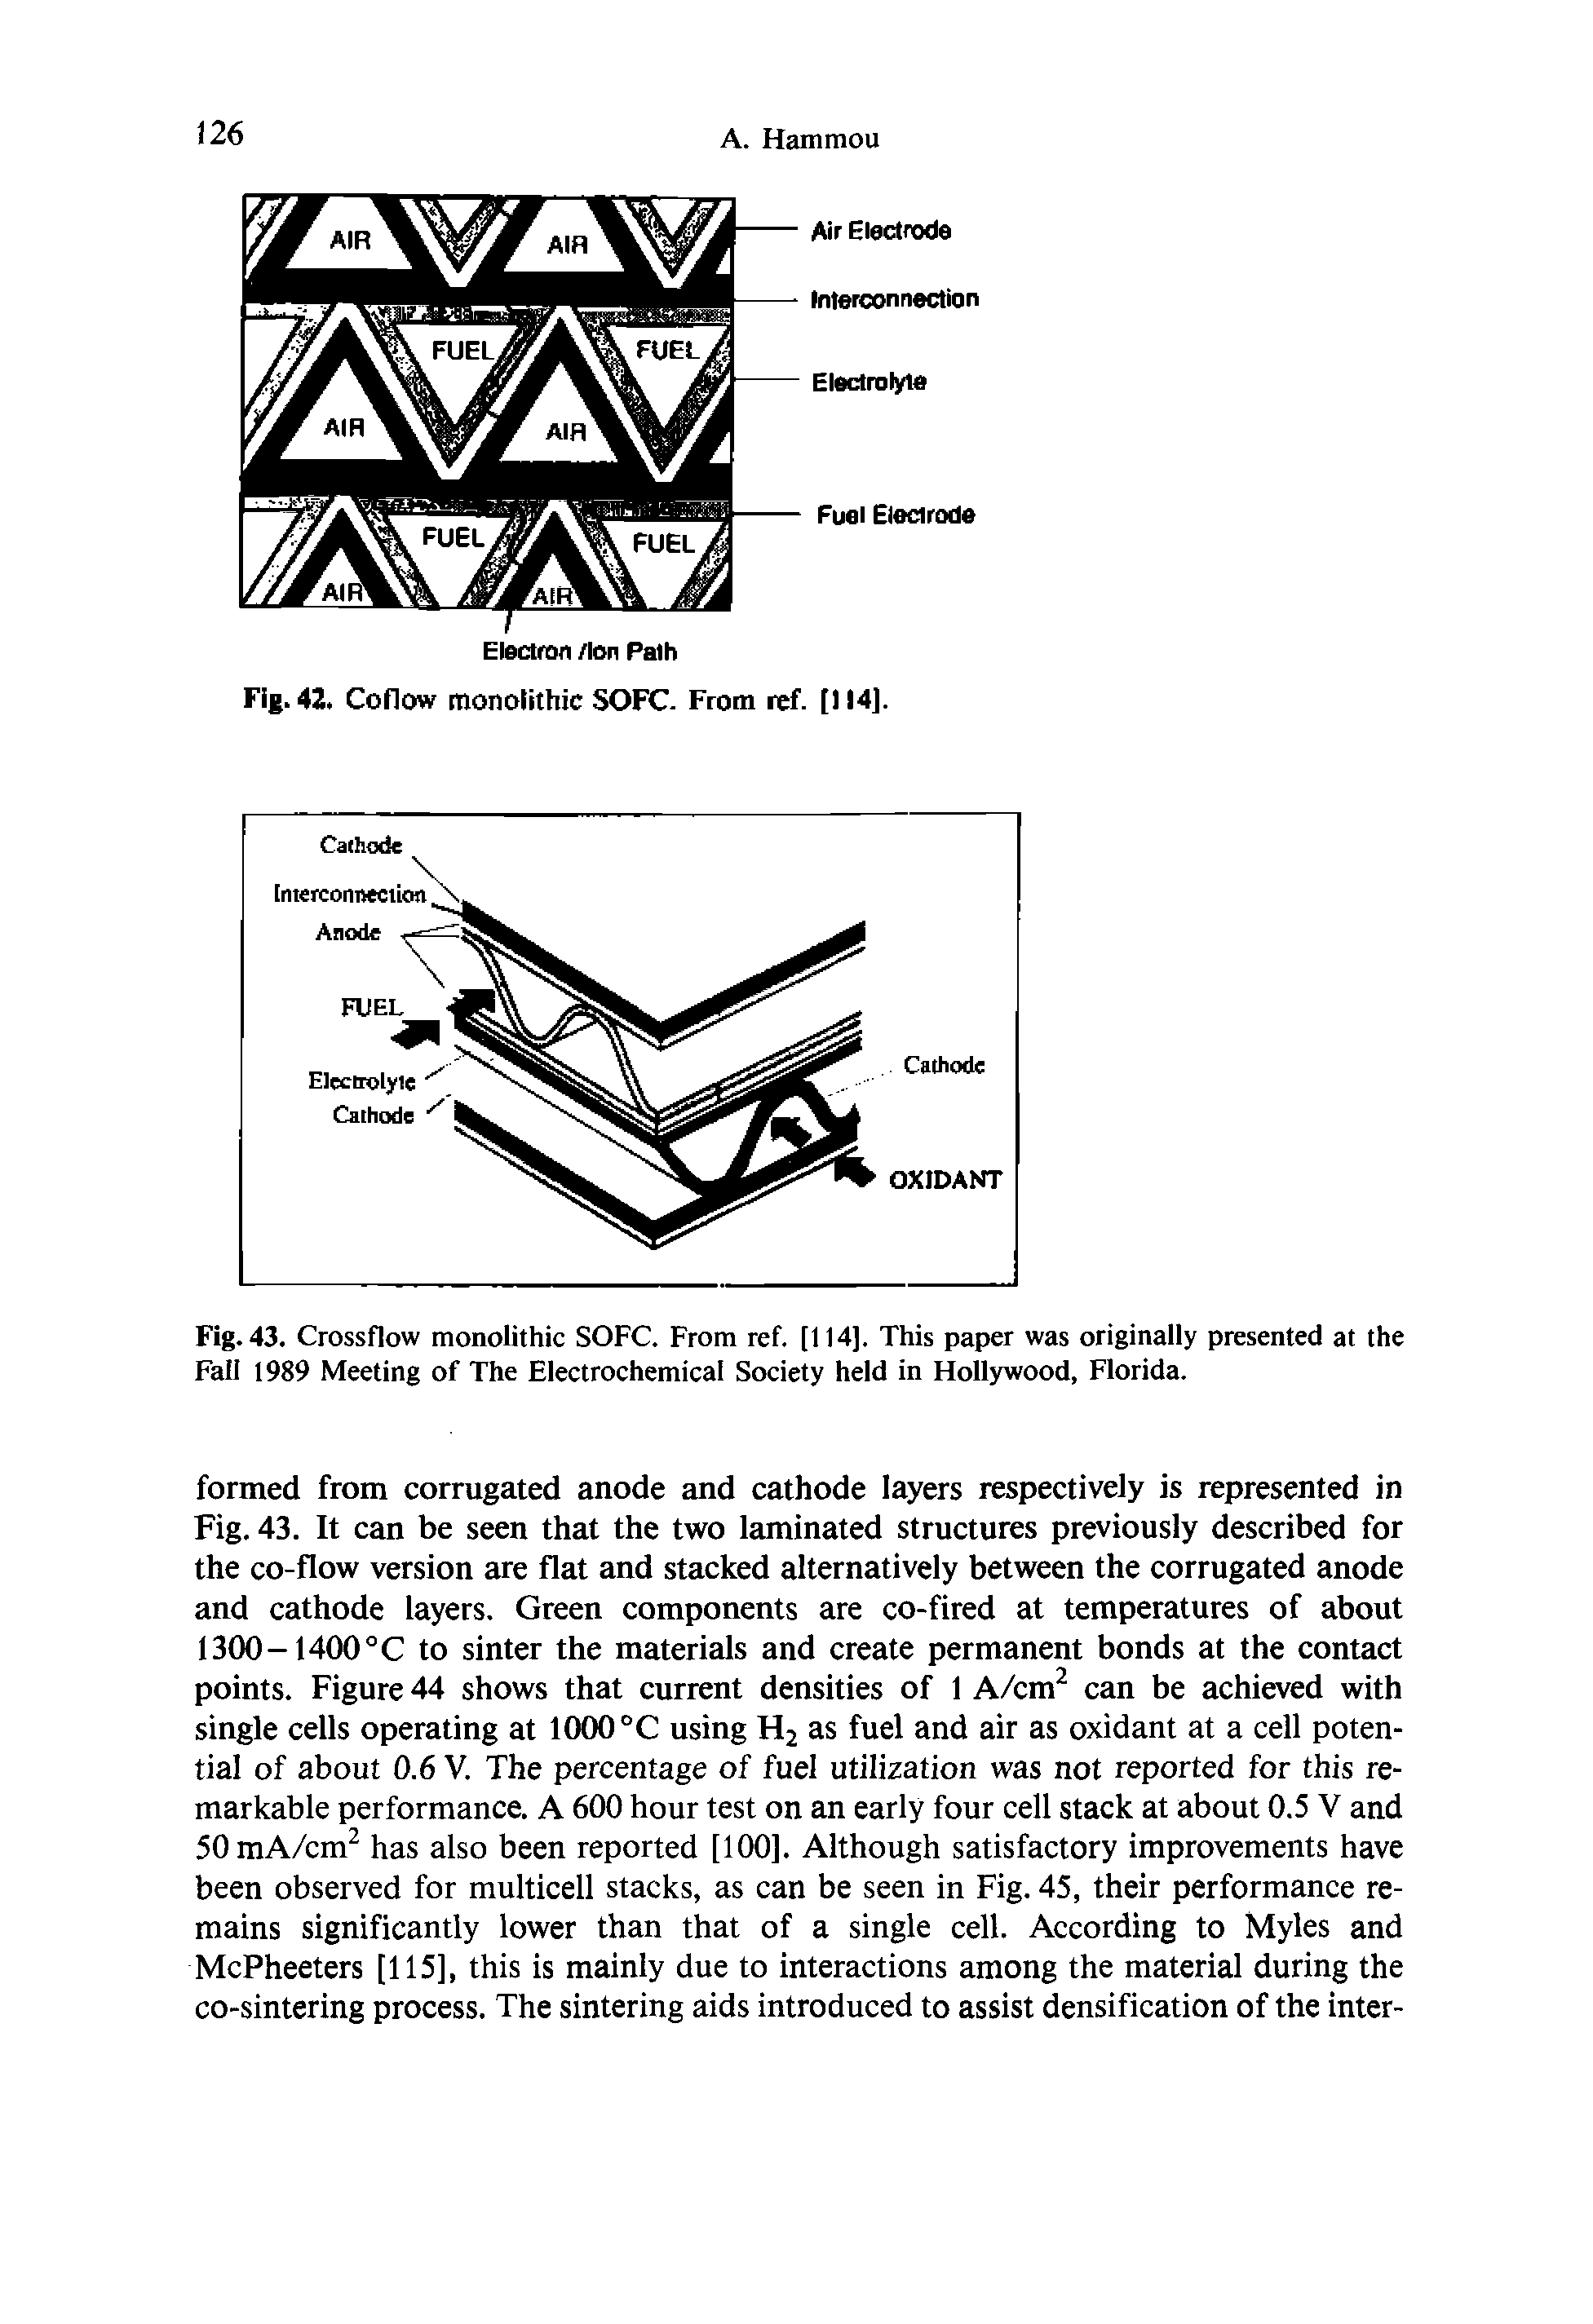 Fig. 43. Crossflow monolithic SOFC. From ref. [114]. This paper was originally presented at the Fall 1989 Meeting of The Electrochemical Society held in Hollywood, Florida.